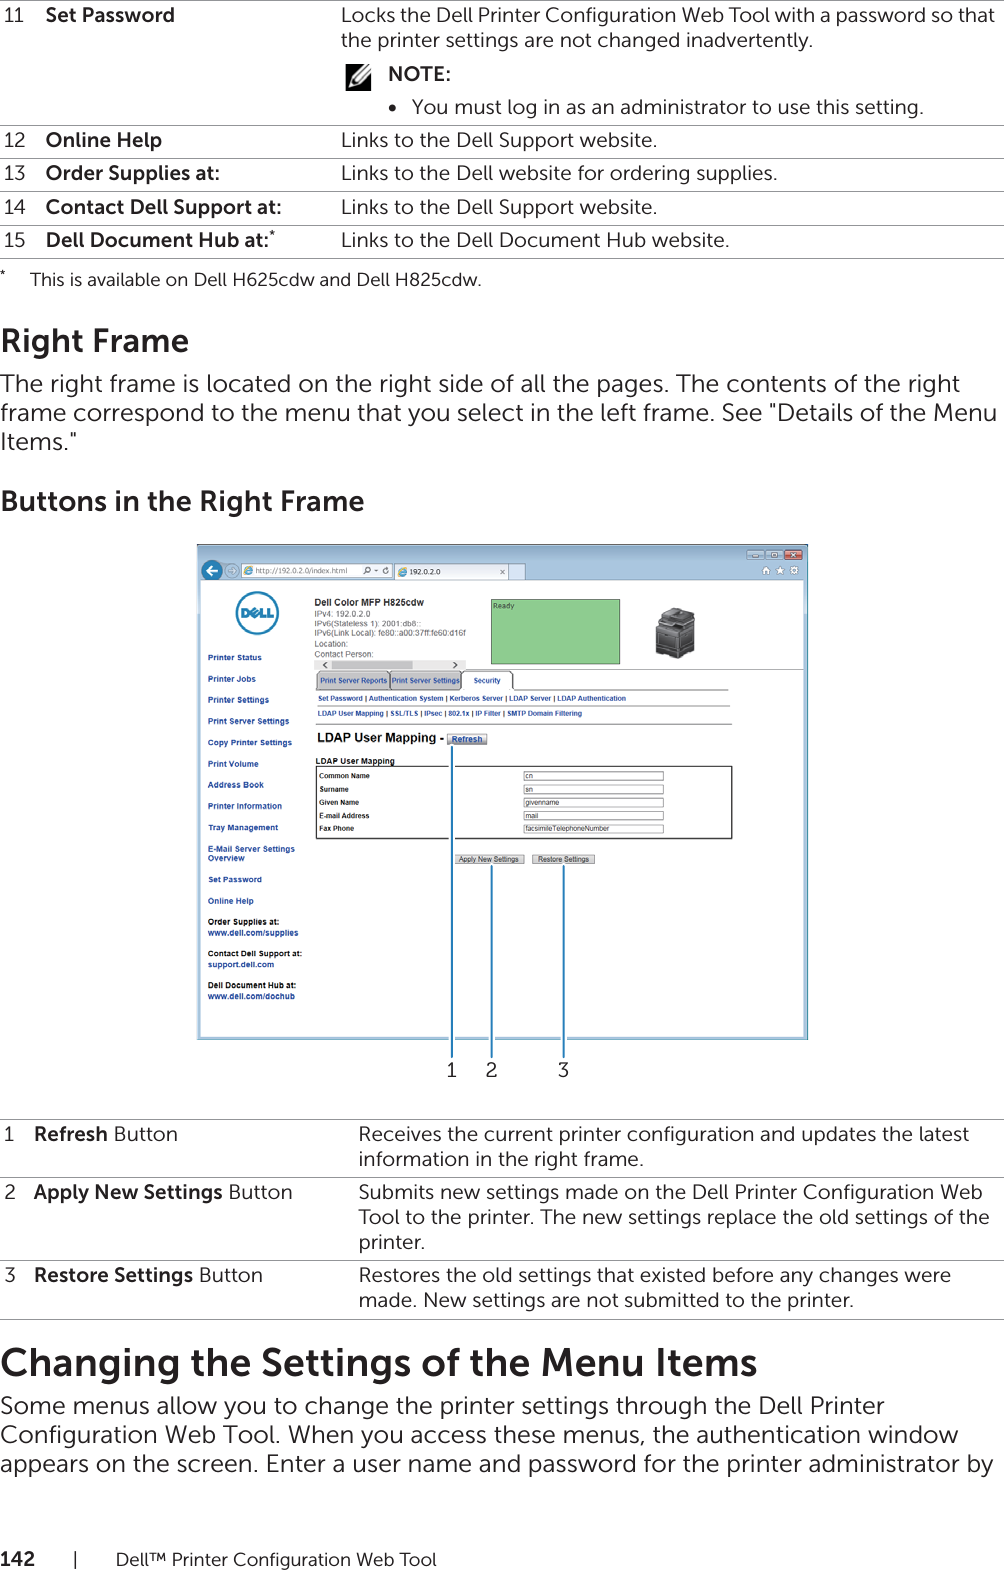 142| Dell™ Printer Configuration Web Tool* This is available on Dell H625cdw and Dell H825cdw.Right FrameThe right frame is located on the right side of all the pages. The contents of the right frame correspond to the menu that you select in the left frame. See &quot;Details of the Menu Items.&quot;Buttons in the Right FrameChanging the Settings of the Menu ItemsSome menus allow you to change the printer settings through the Dell Printer Configuration Web Tool. When you access these menus, the authentication window appears on the screen. Enter a user name and password for the printer administrator by 11 Set Password Locks the Dell Printer Configuration Web Tool with a password so that the printer settings are not changed inadvertently.NOTE:•You must log in as an administrator to use this setting.12 Online Help Links to the Dell Support website.13 Order Supplies at: Links to the Dell website for ordering supplies.14 Contact Dell Support at: Links to the Dell Support website.15 Dell Document Hub at:*Links to the Dell Document Hub website.1Refresh Button Receives the current printer configuration and updates the latest information in the right frame.2Apply New Settings Button Submits new settings made on the Dell Printer Configuration Web Tool to the printer. The new settings replace the old settings of the printer.3Restore Settings Button Restores the old settings that existed before any changes were made. New settings are not submitted to the printer.321